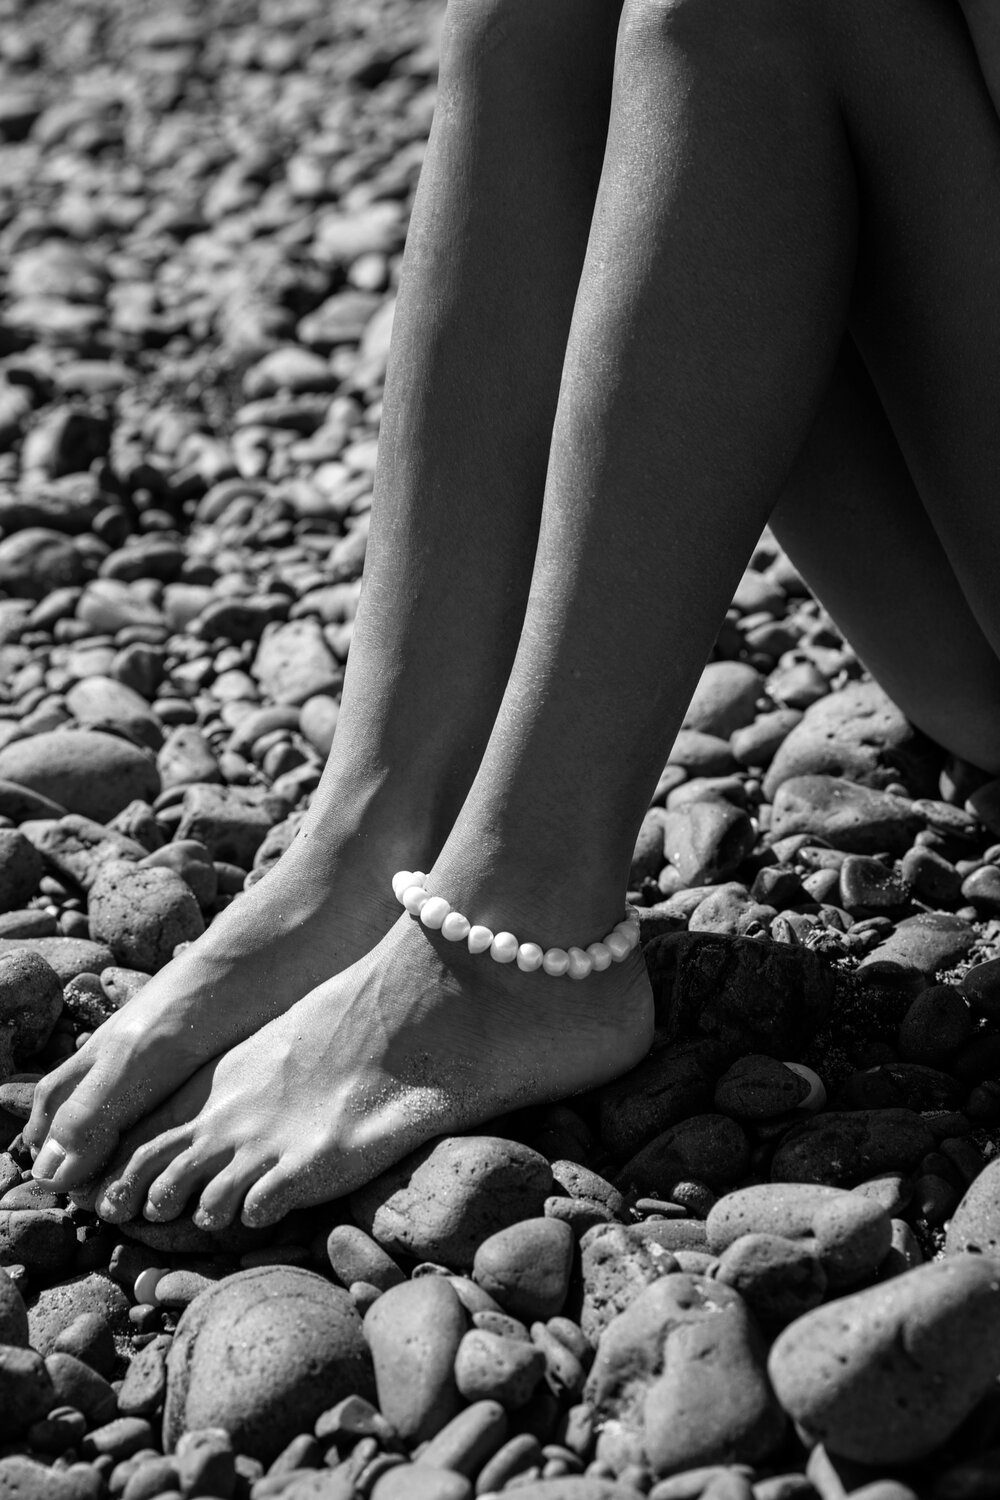 pearl anklets